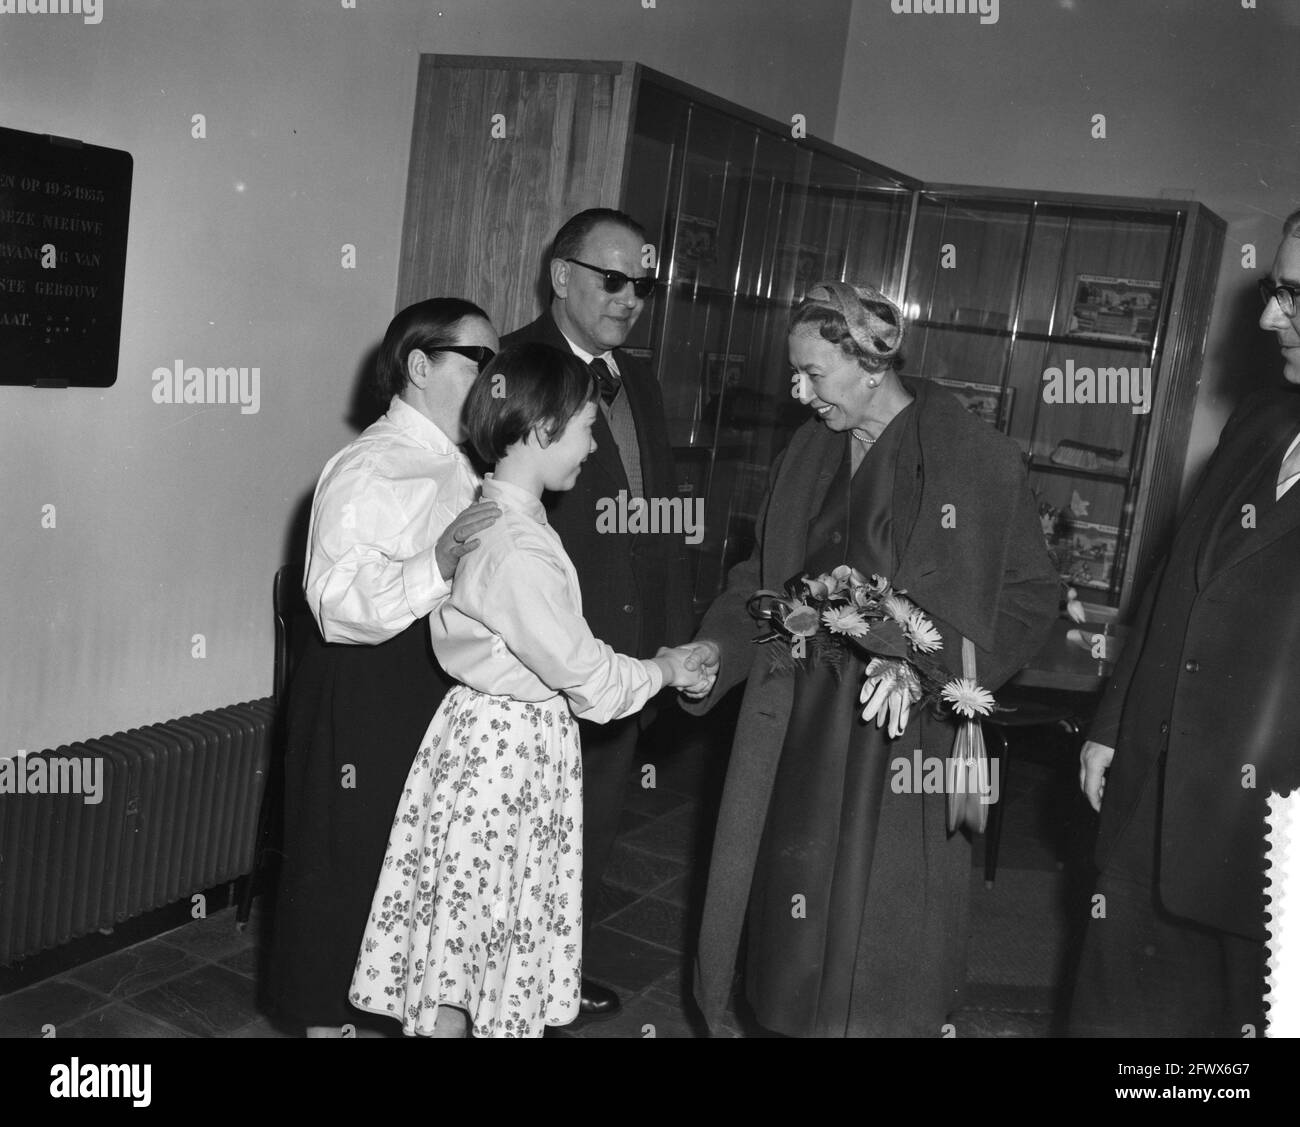 Opening by Mrs. Van Walsum in the studio of the Spoken Word of the Tanna Wilh. Bruynzeelstichting in Rotterdam, April 1, 1959, Openings, studios, The Netherlands, 20th century press agency photo, news to remember, documentary, historic photography 1945-1990, visual stories, human history of the Twentieth Century, capturing moments in time Stock Photo